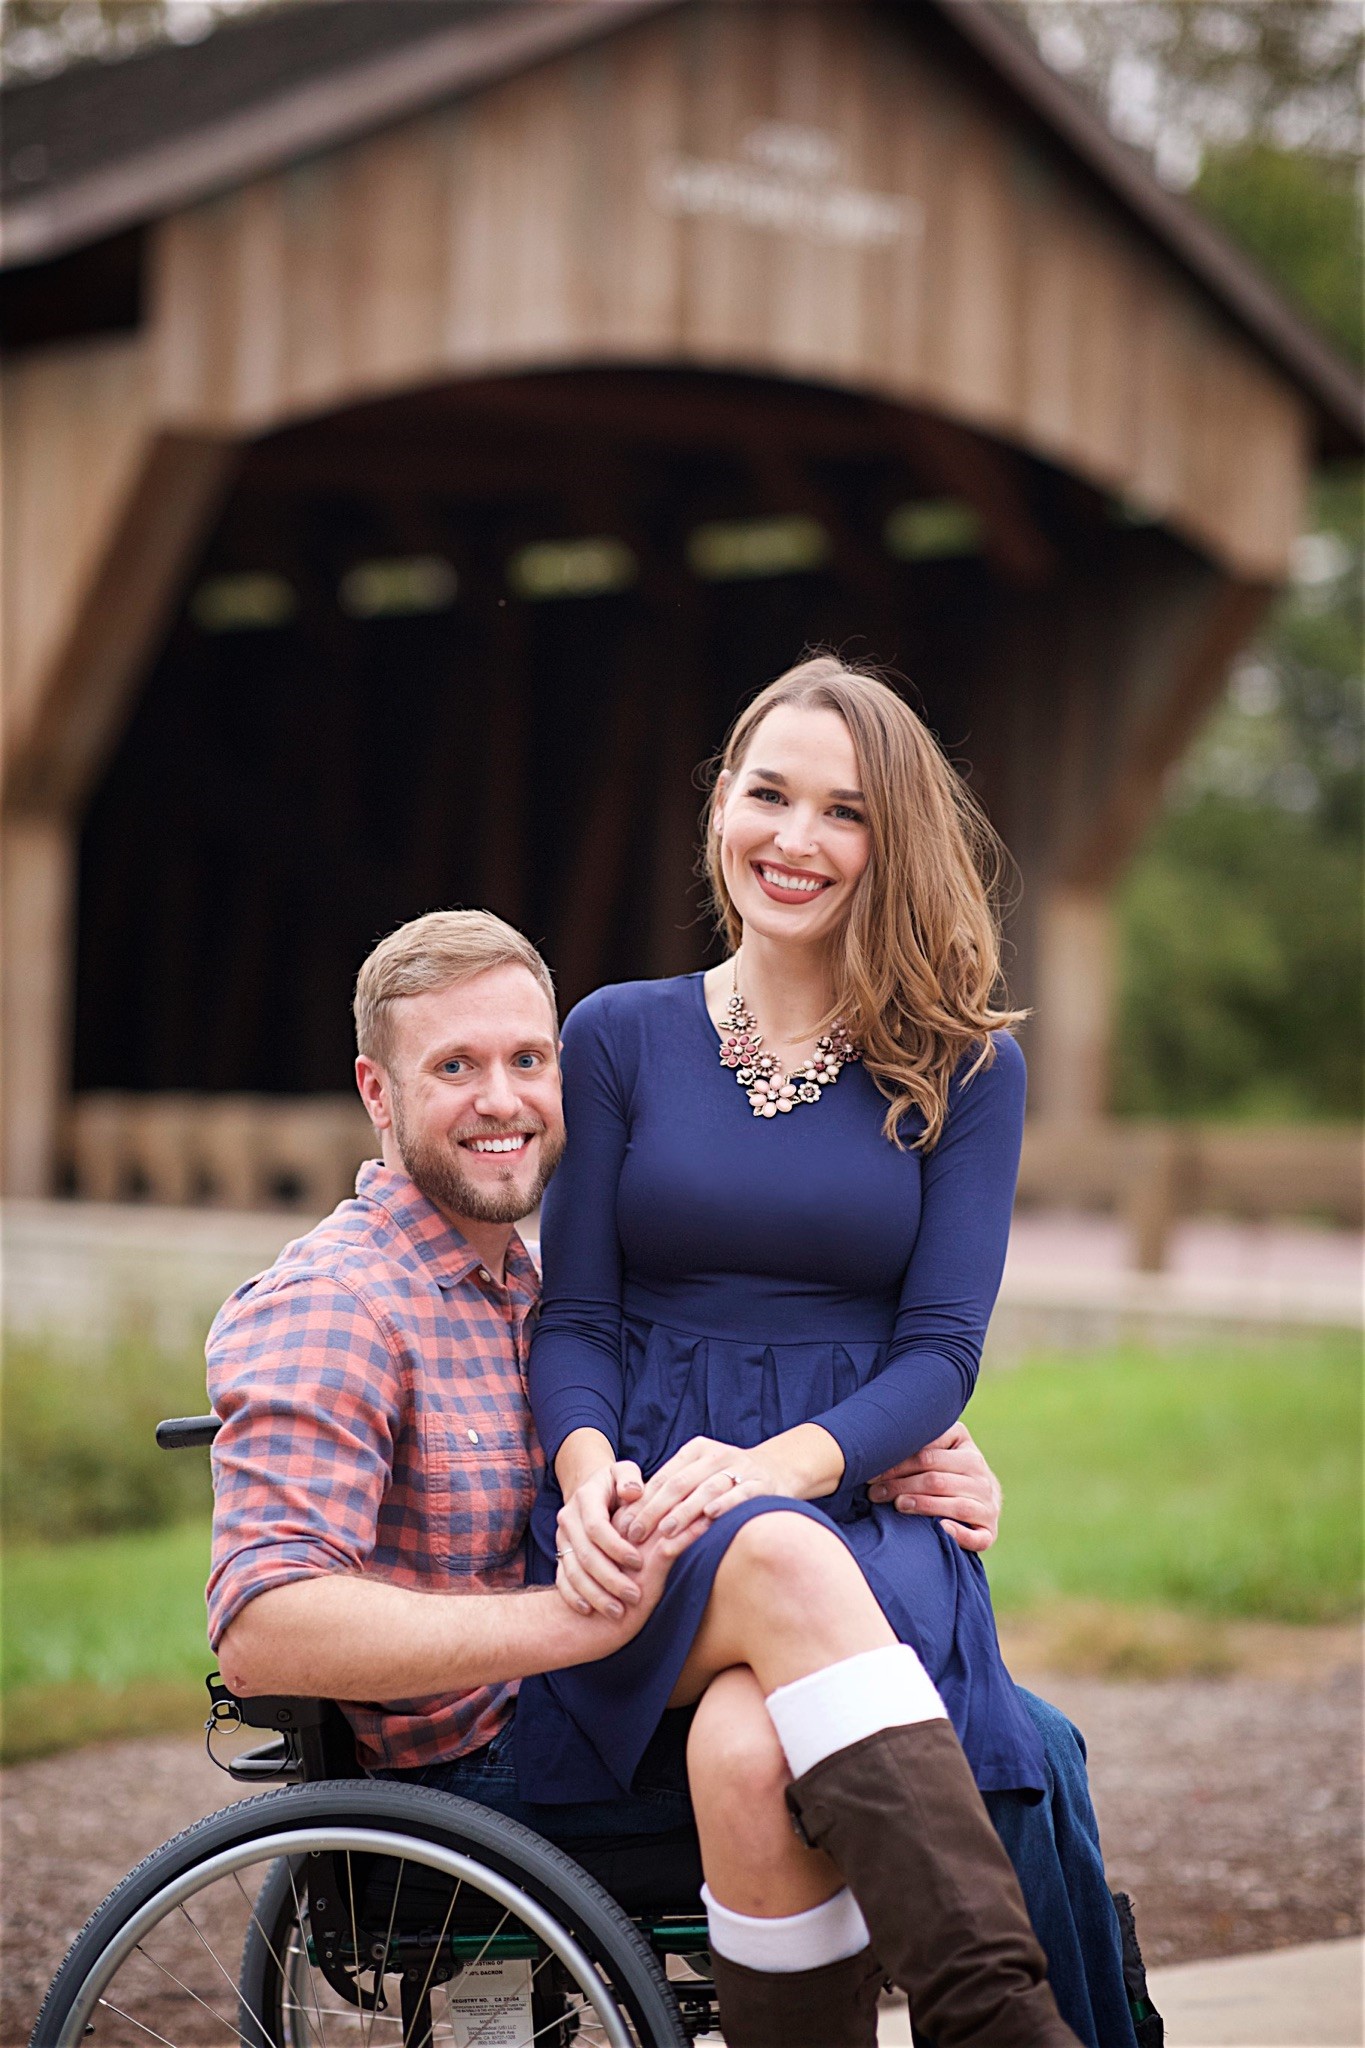 Student Kathleen Cleary and fiance